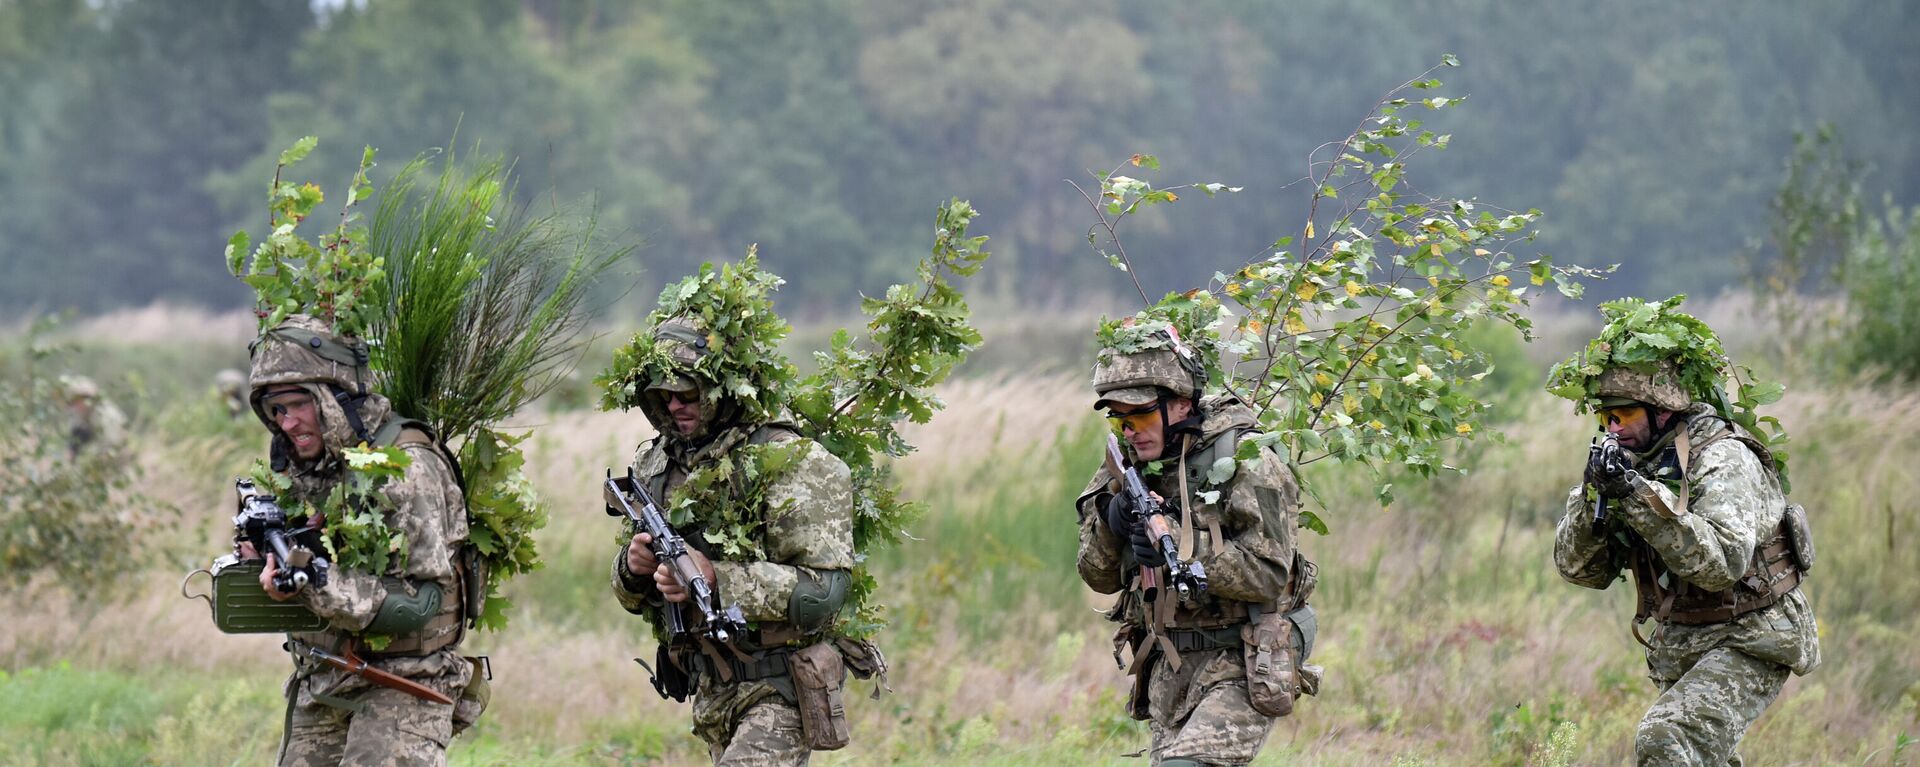 Soldiers take part in an exercise at the Yavoriv military training ground, close to Lvov, Western Ukraine, Friday, Sept 24, 2021. Ukraine, the US, and other NATO countries continue joint military drills in Western Ukraine presenting offensive exercises in town-like surroundings with tanks and other military vehicles involved.  - Sputnik International, 1920, 15.12.2021